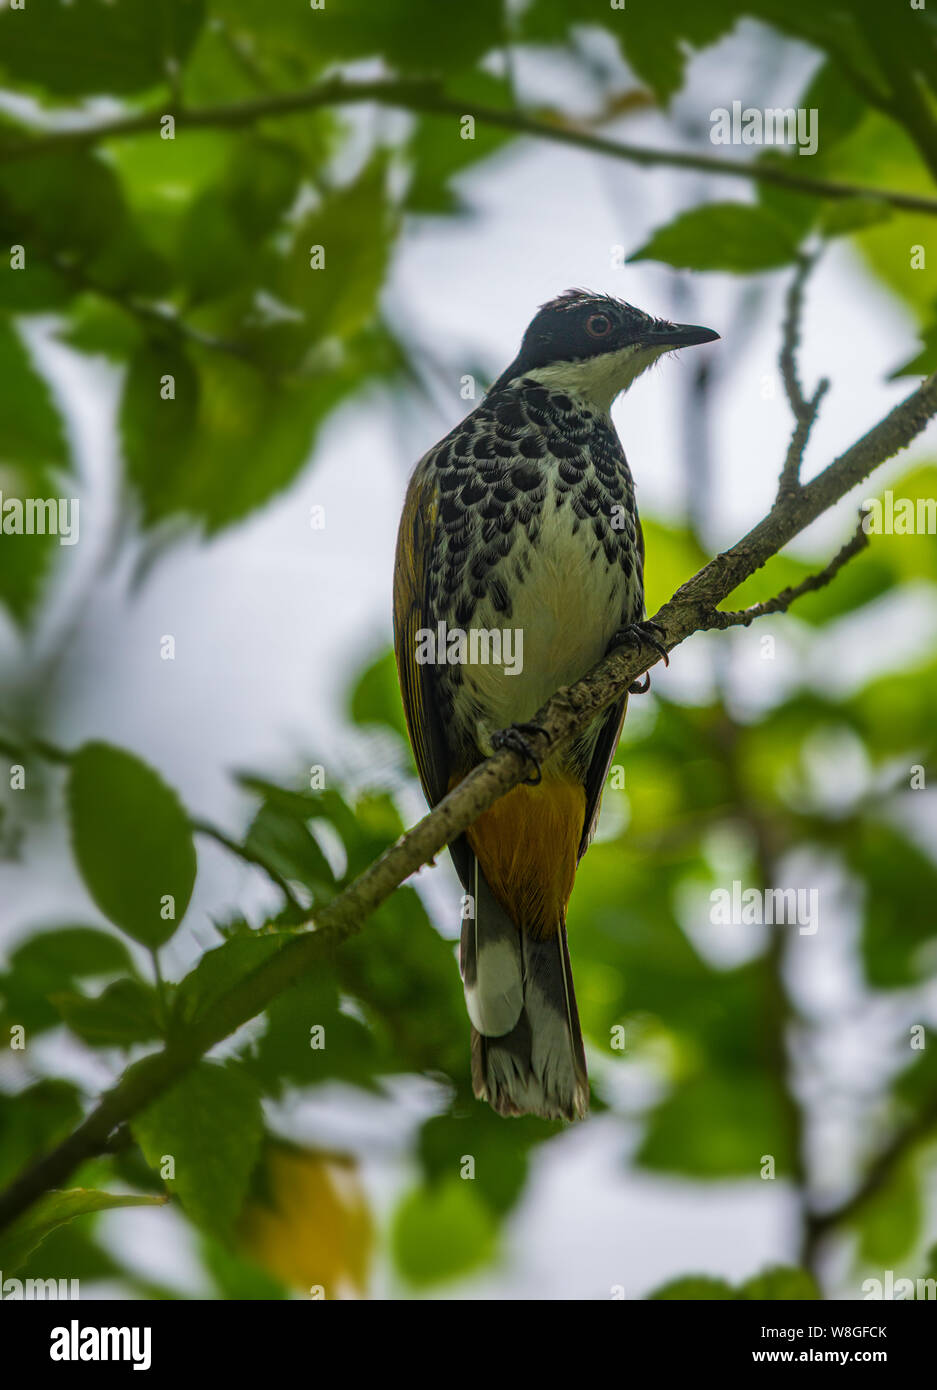 Scaly breasted bulbul, Pycnonotus squamatus perched on a tree branch Stock Photo